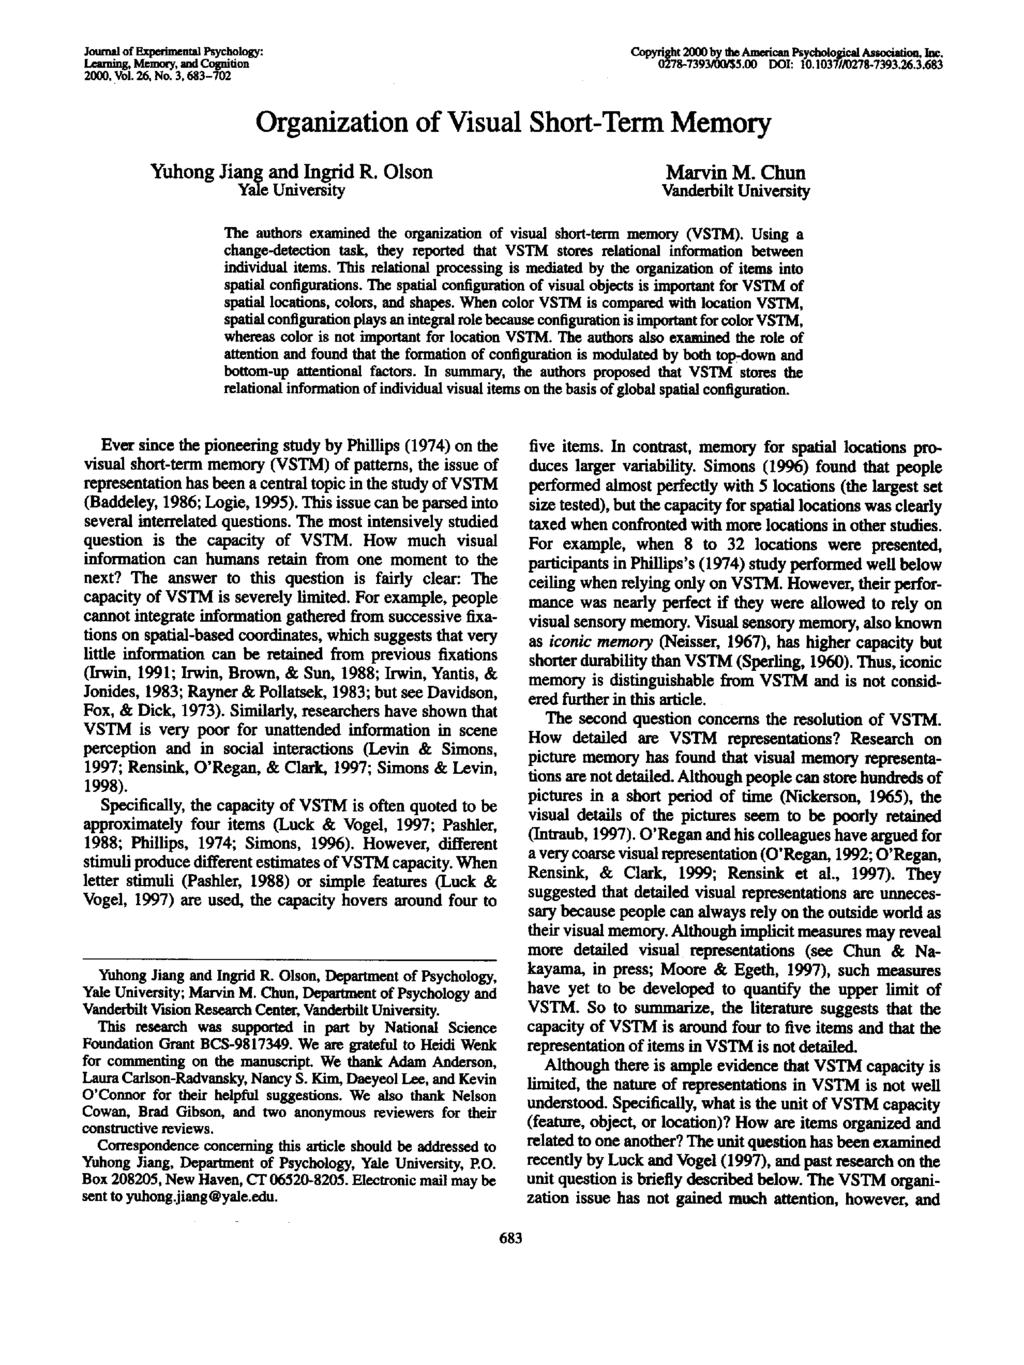 Journal of Experimental Psychology: Learning, Memory, and Cognition 2000, Vol. 26, No. 3.683-702 Copyright 2000 by the American Psychological Association, Inc. 0278-7393AKW5.00 DOT: 1O.1O37W0278-7393.